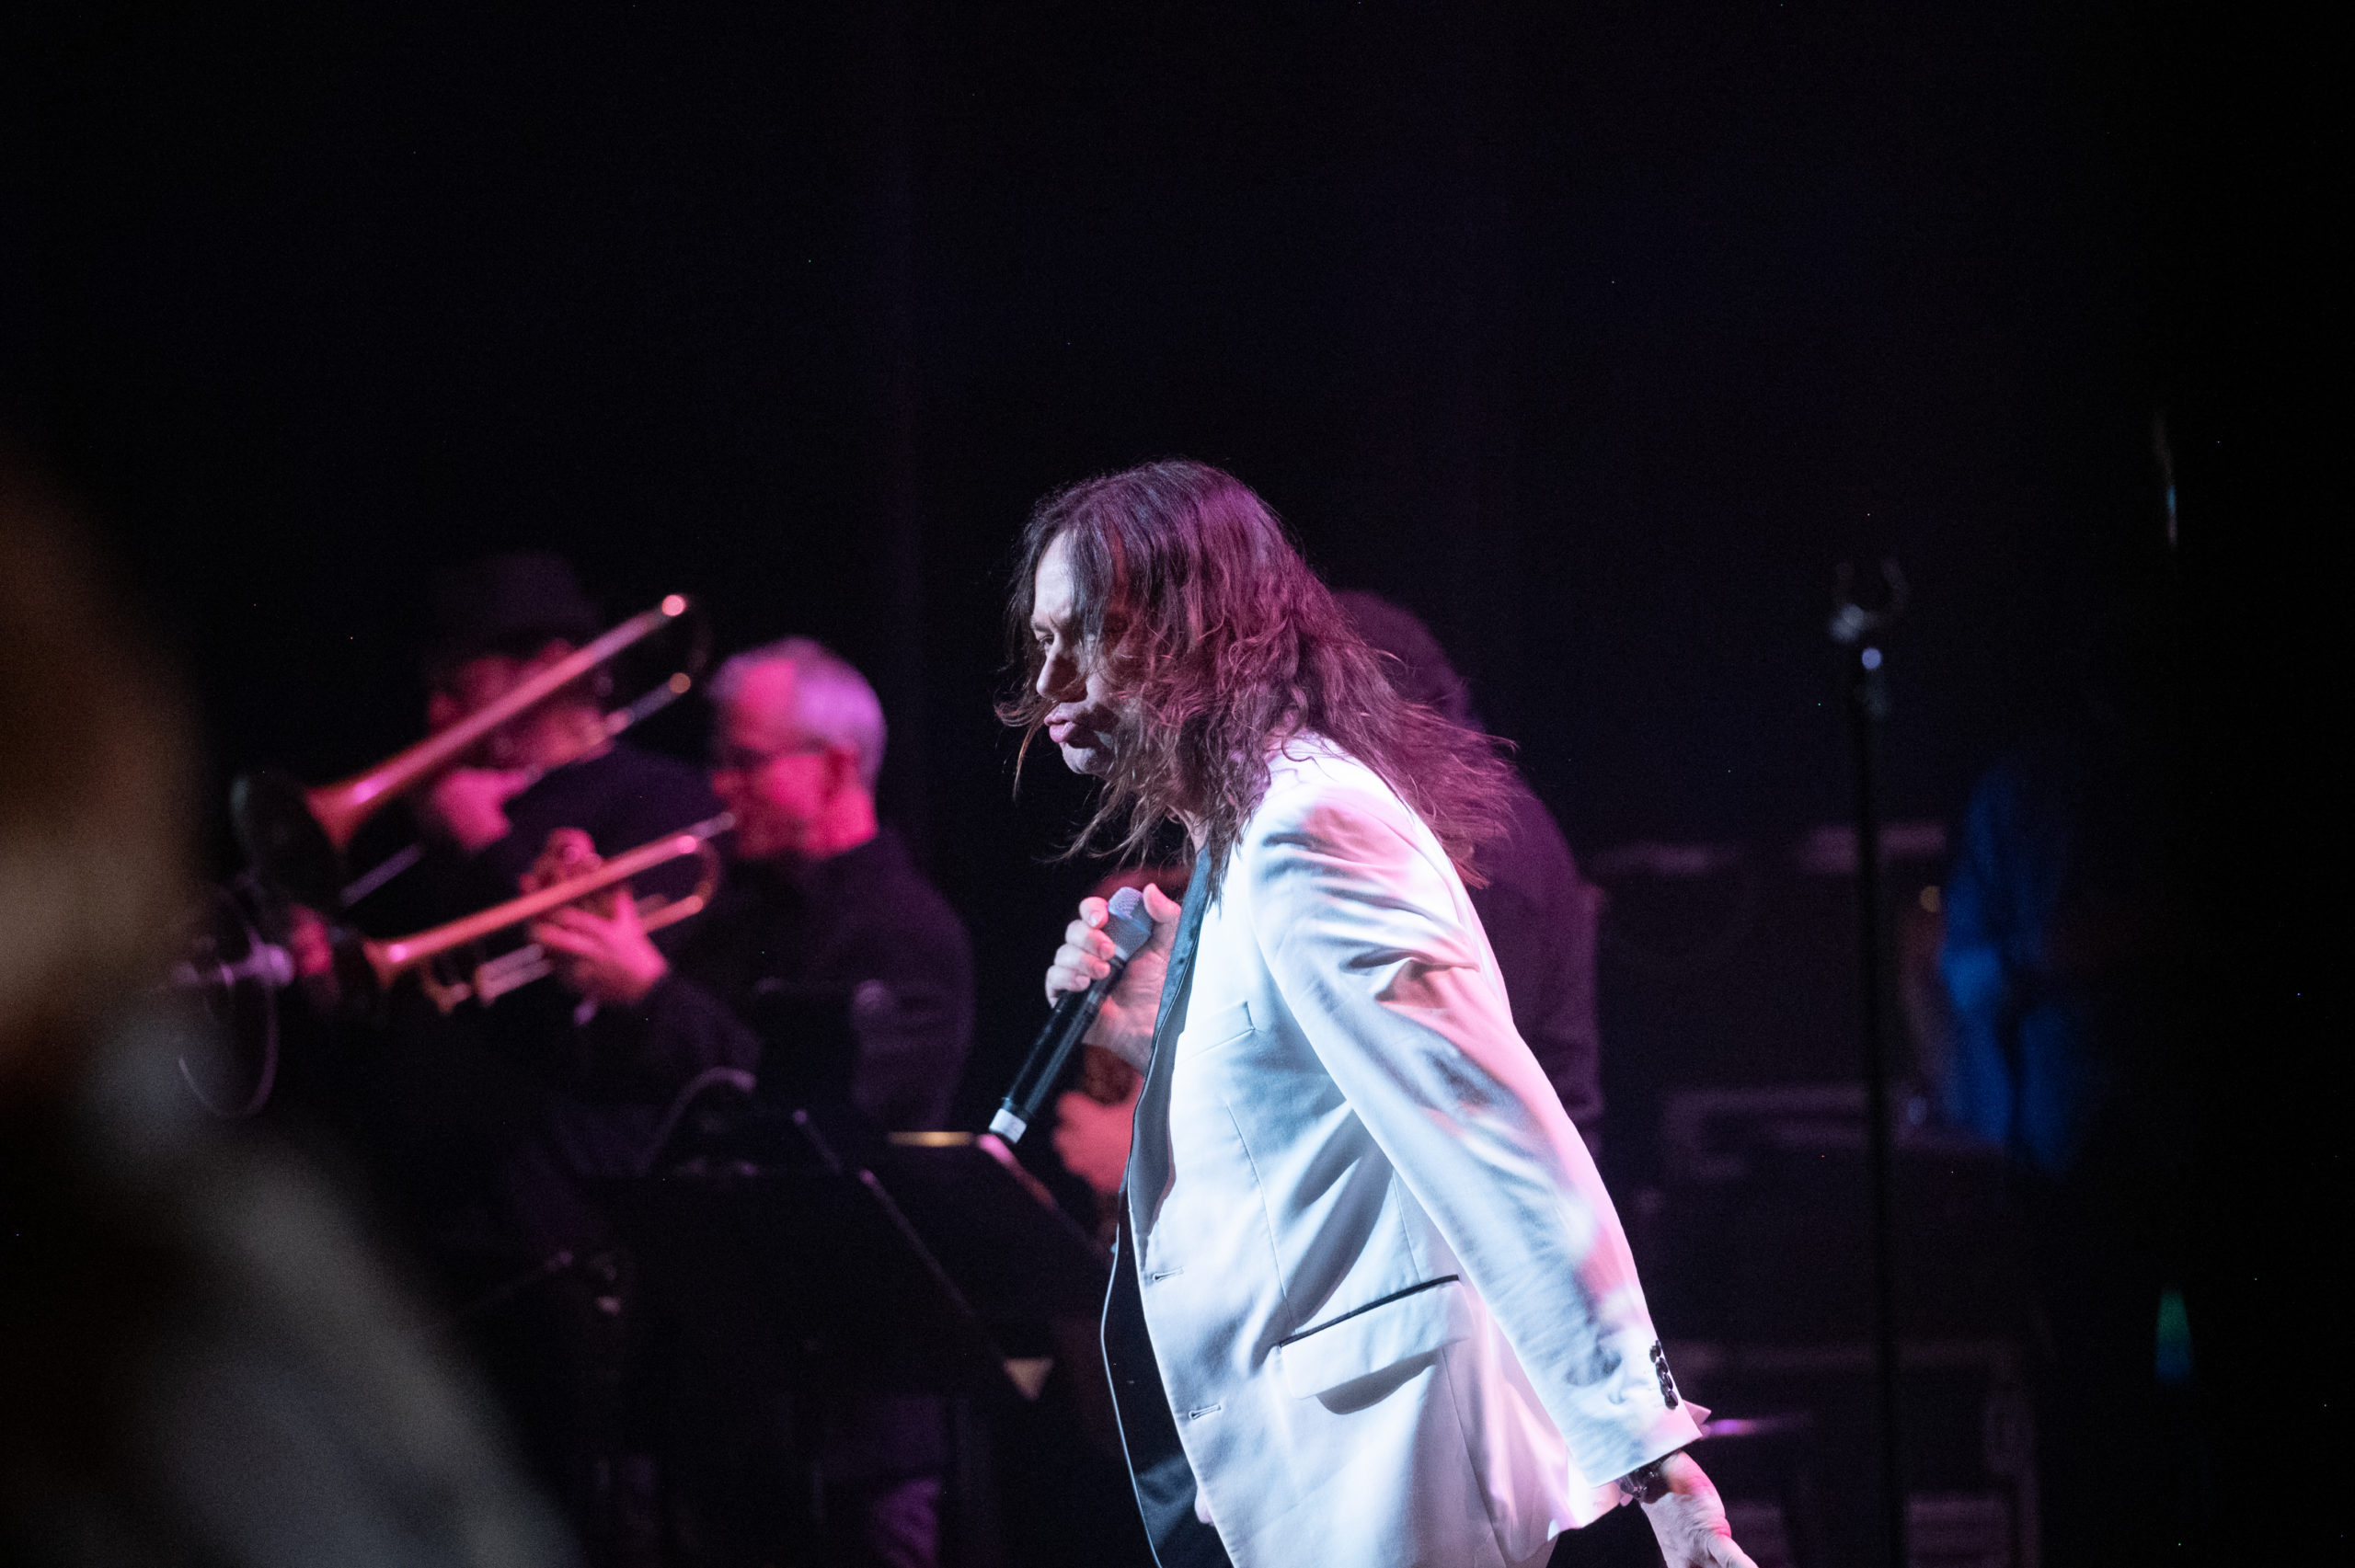 Constantine Maroulis in The Rock Project's live-stream performance of The Who’s album 